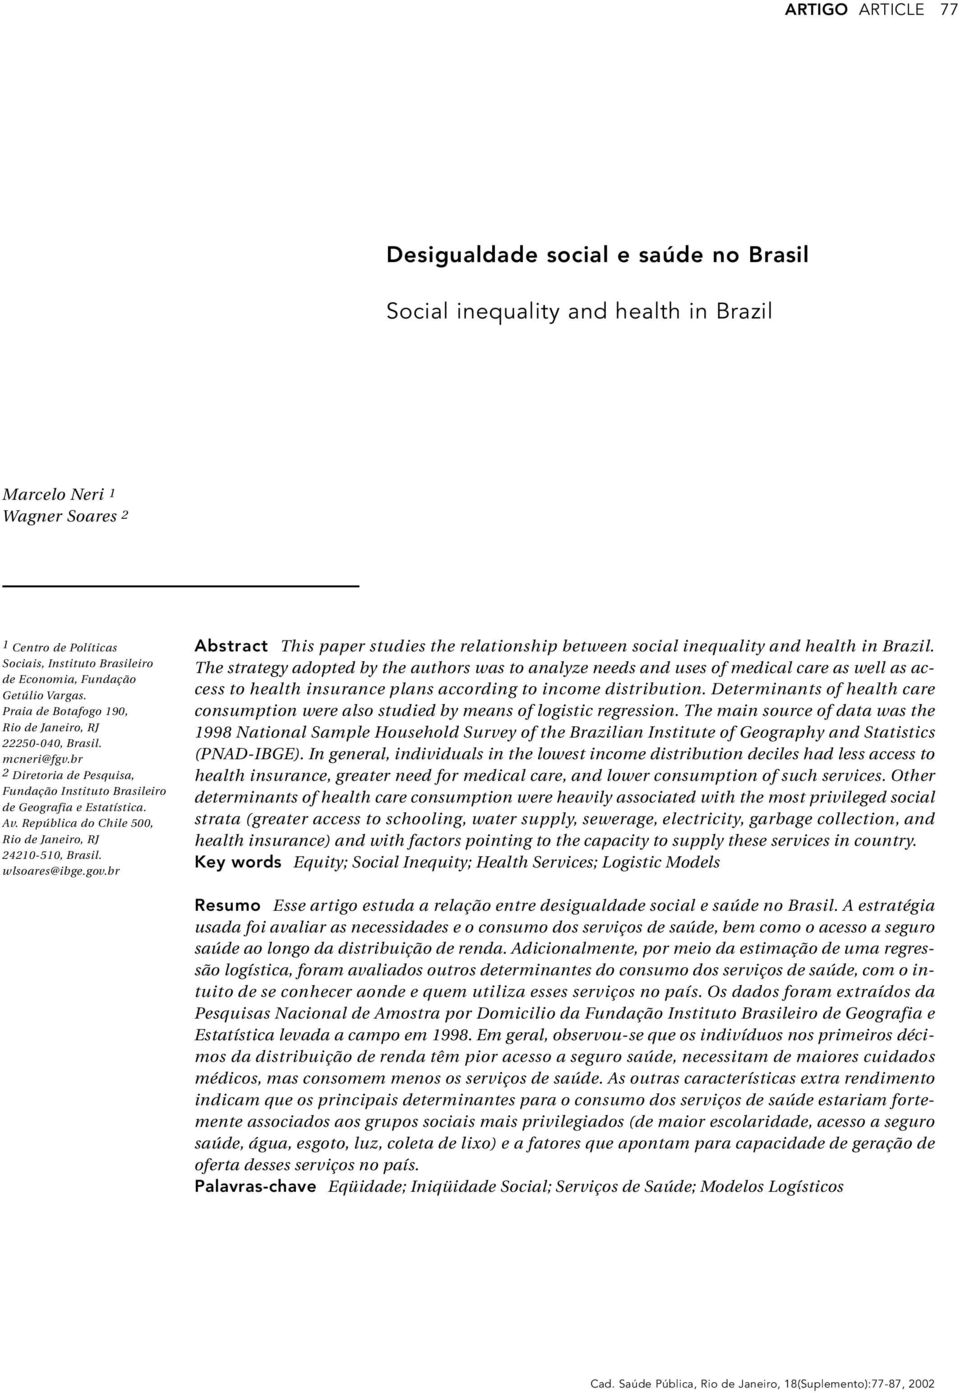 República do Chile 500, Rio de Janeiro, RJ 24210-510, Brasil. wlsoares@ibge.gov.br Abstract This paper studies the relationship between social inequality and health in Brazil.